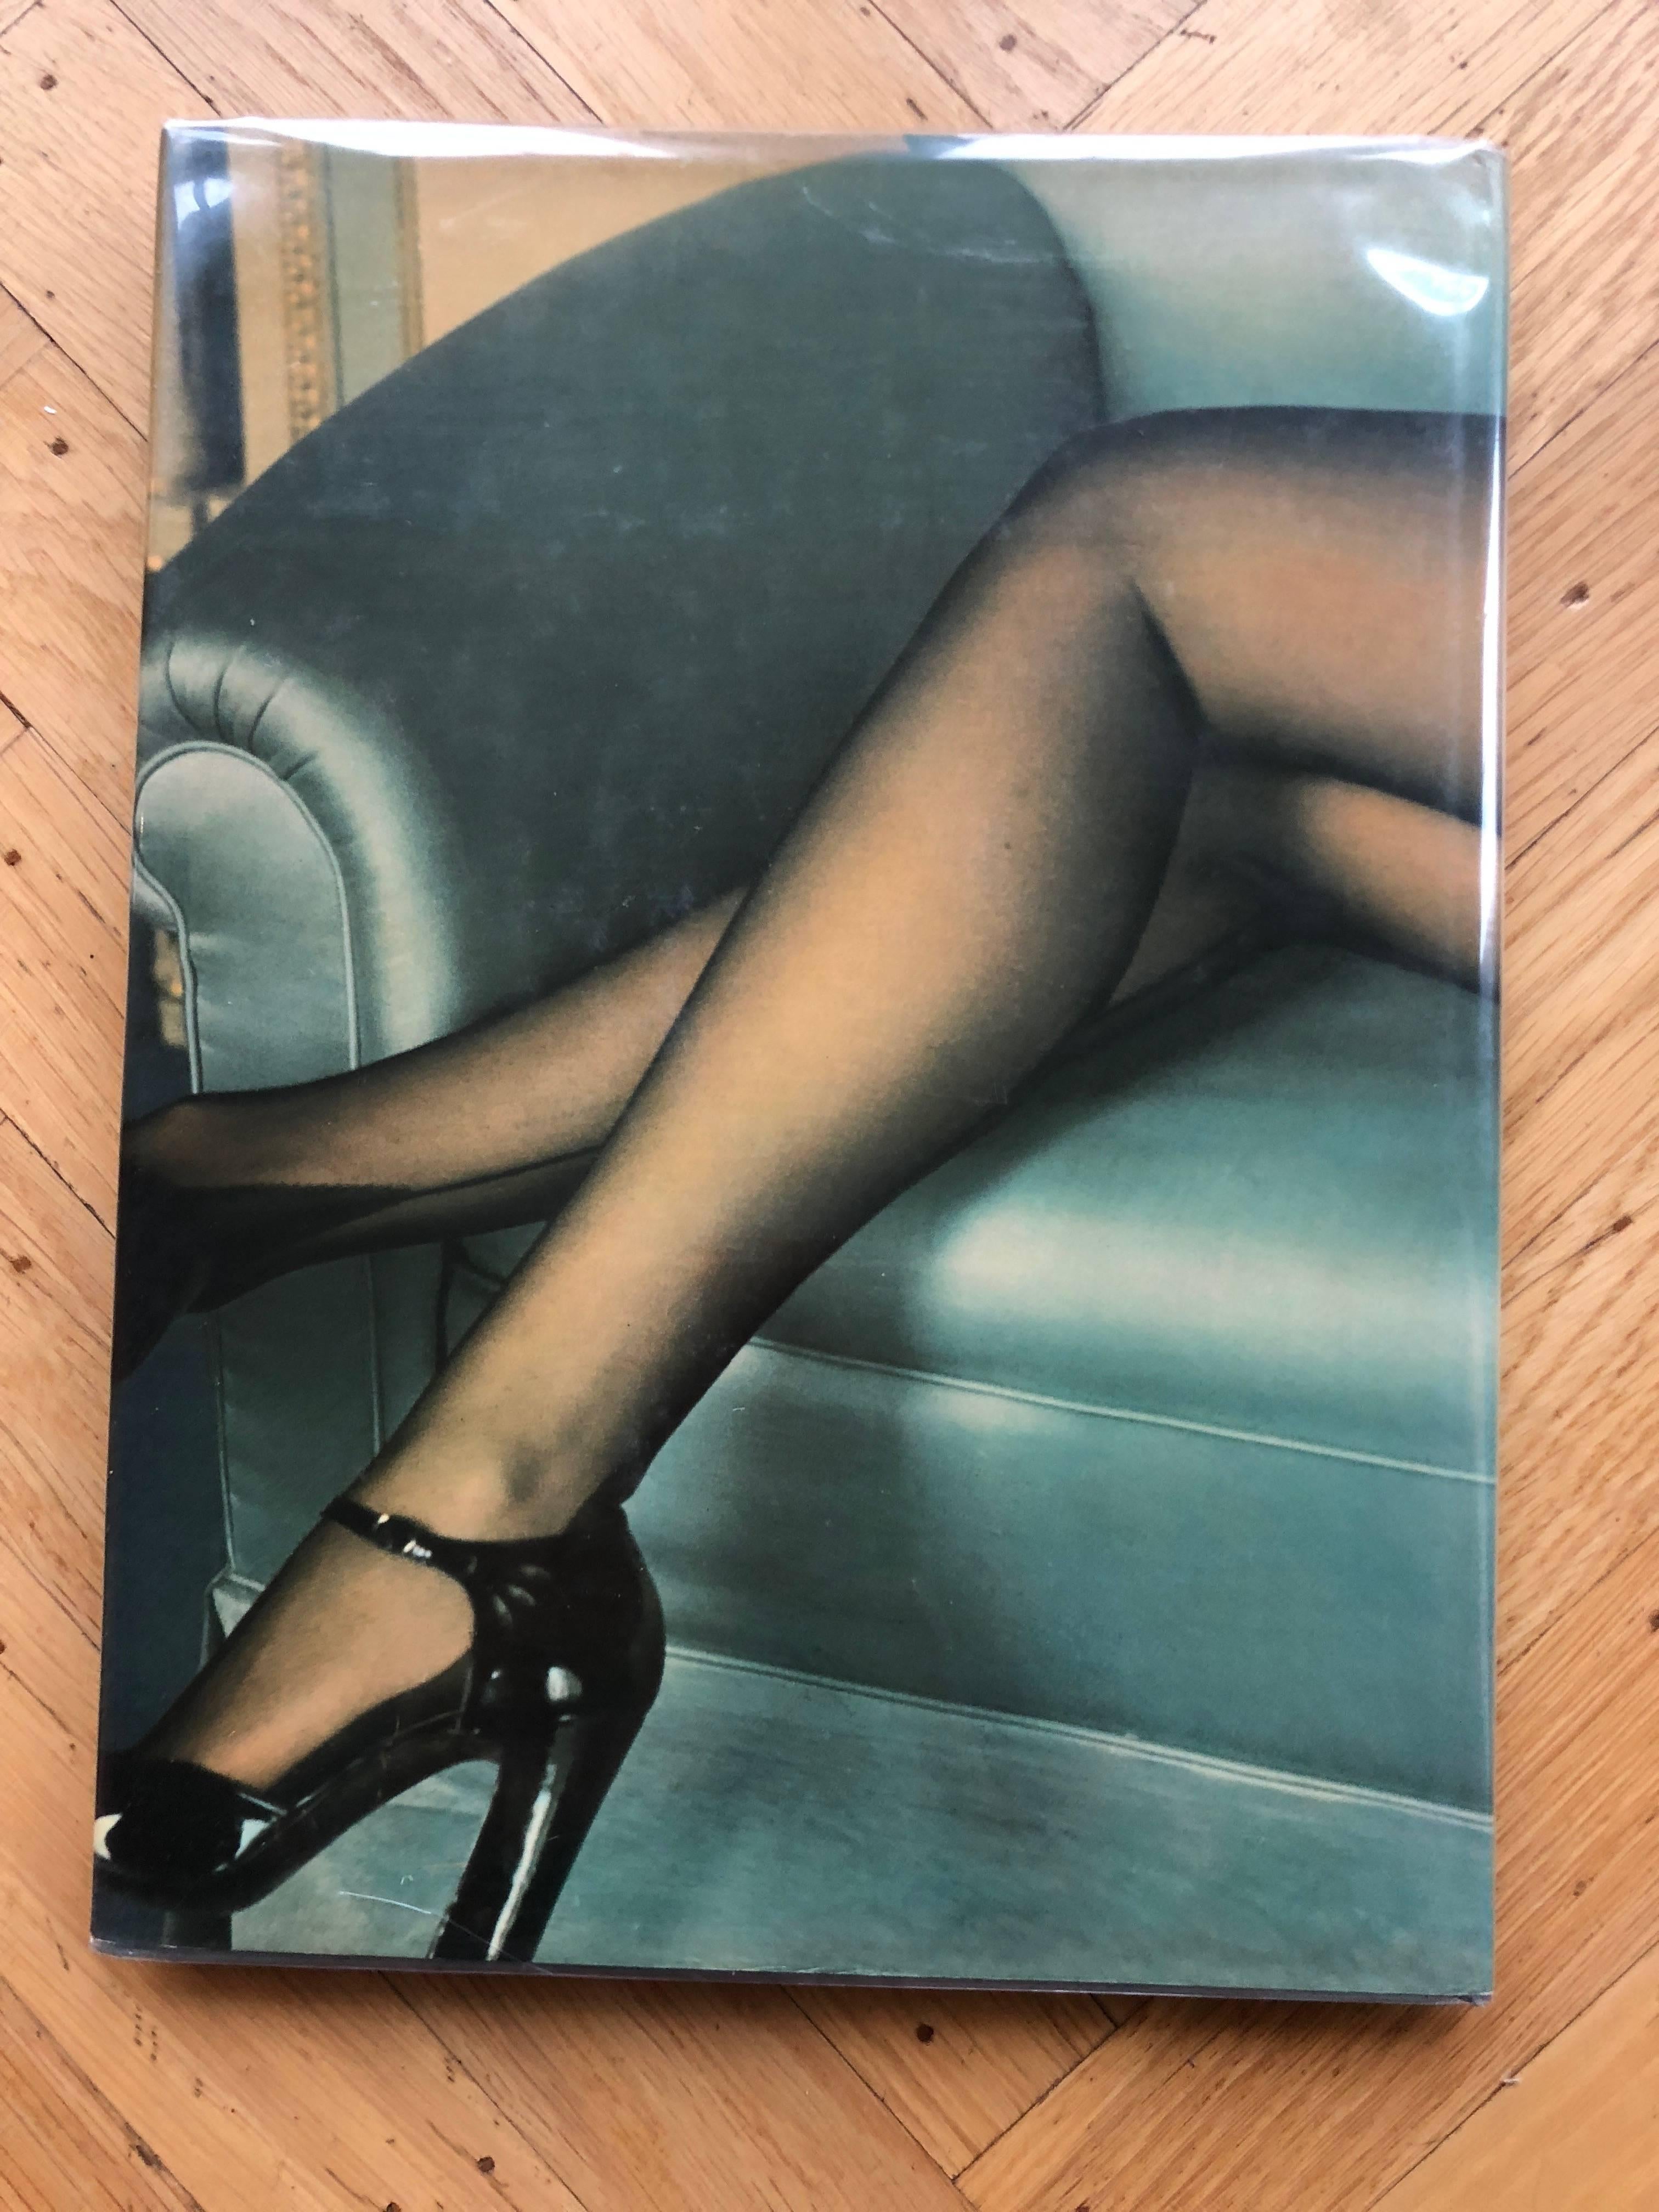 Iconic book from Helmut Newton, 1976.
Groundbreaking in it's time, exotic and erotic images from the master.
12" x 9.5"